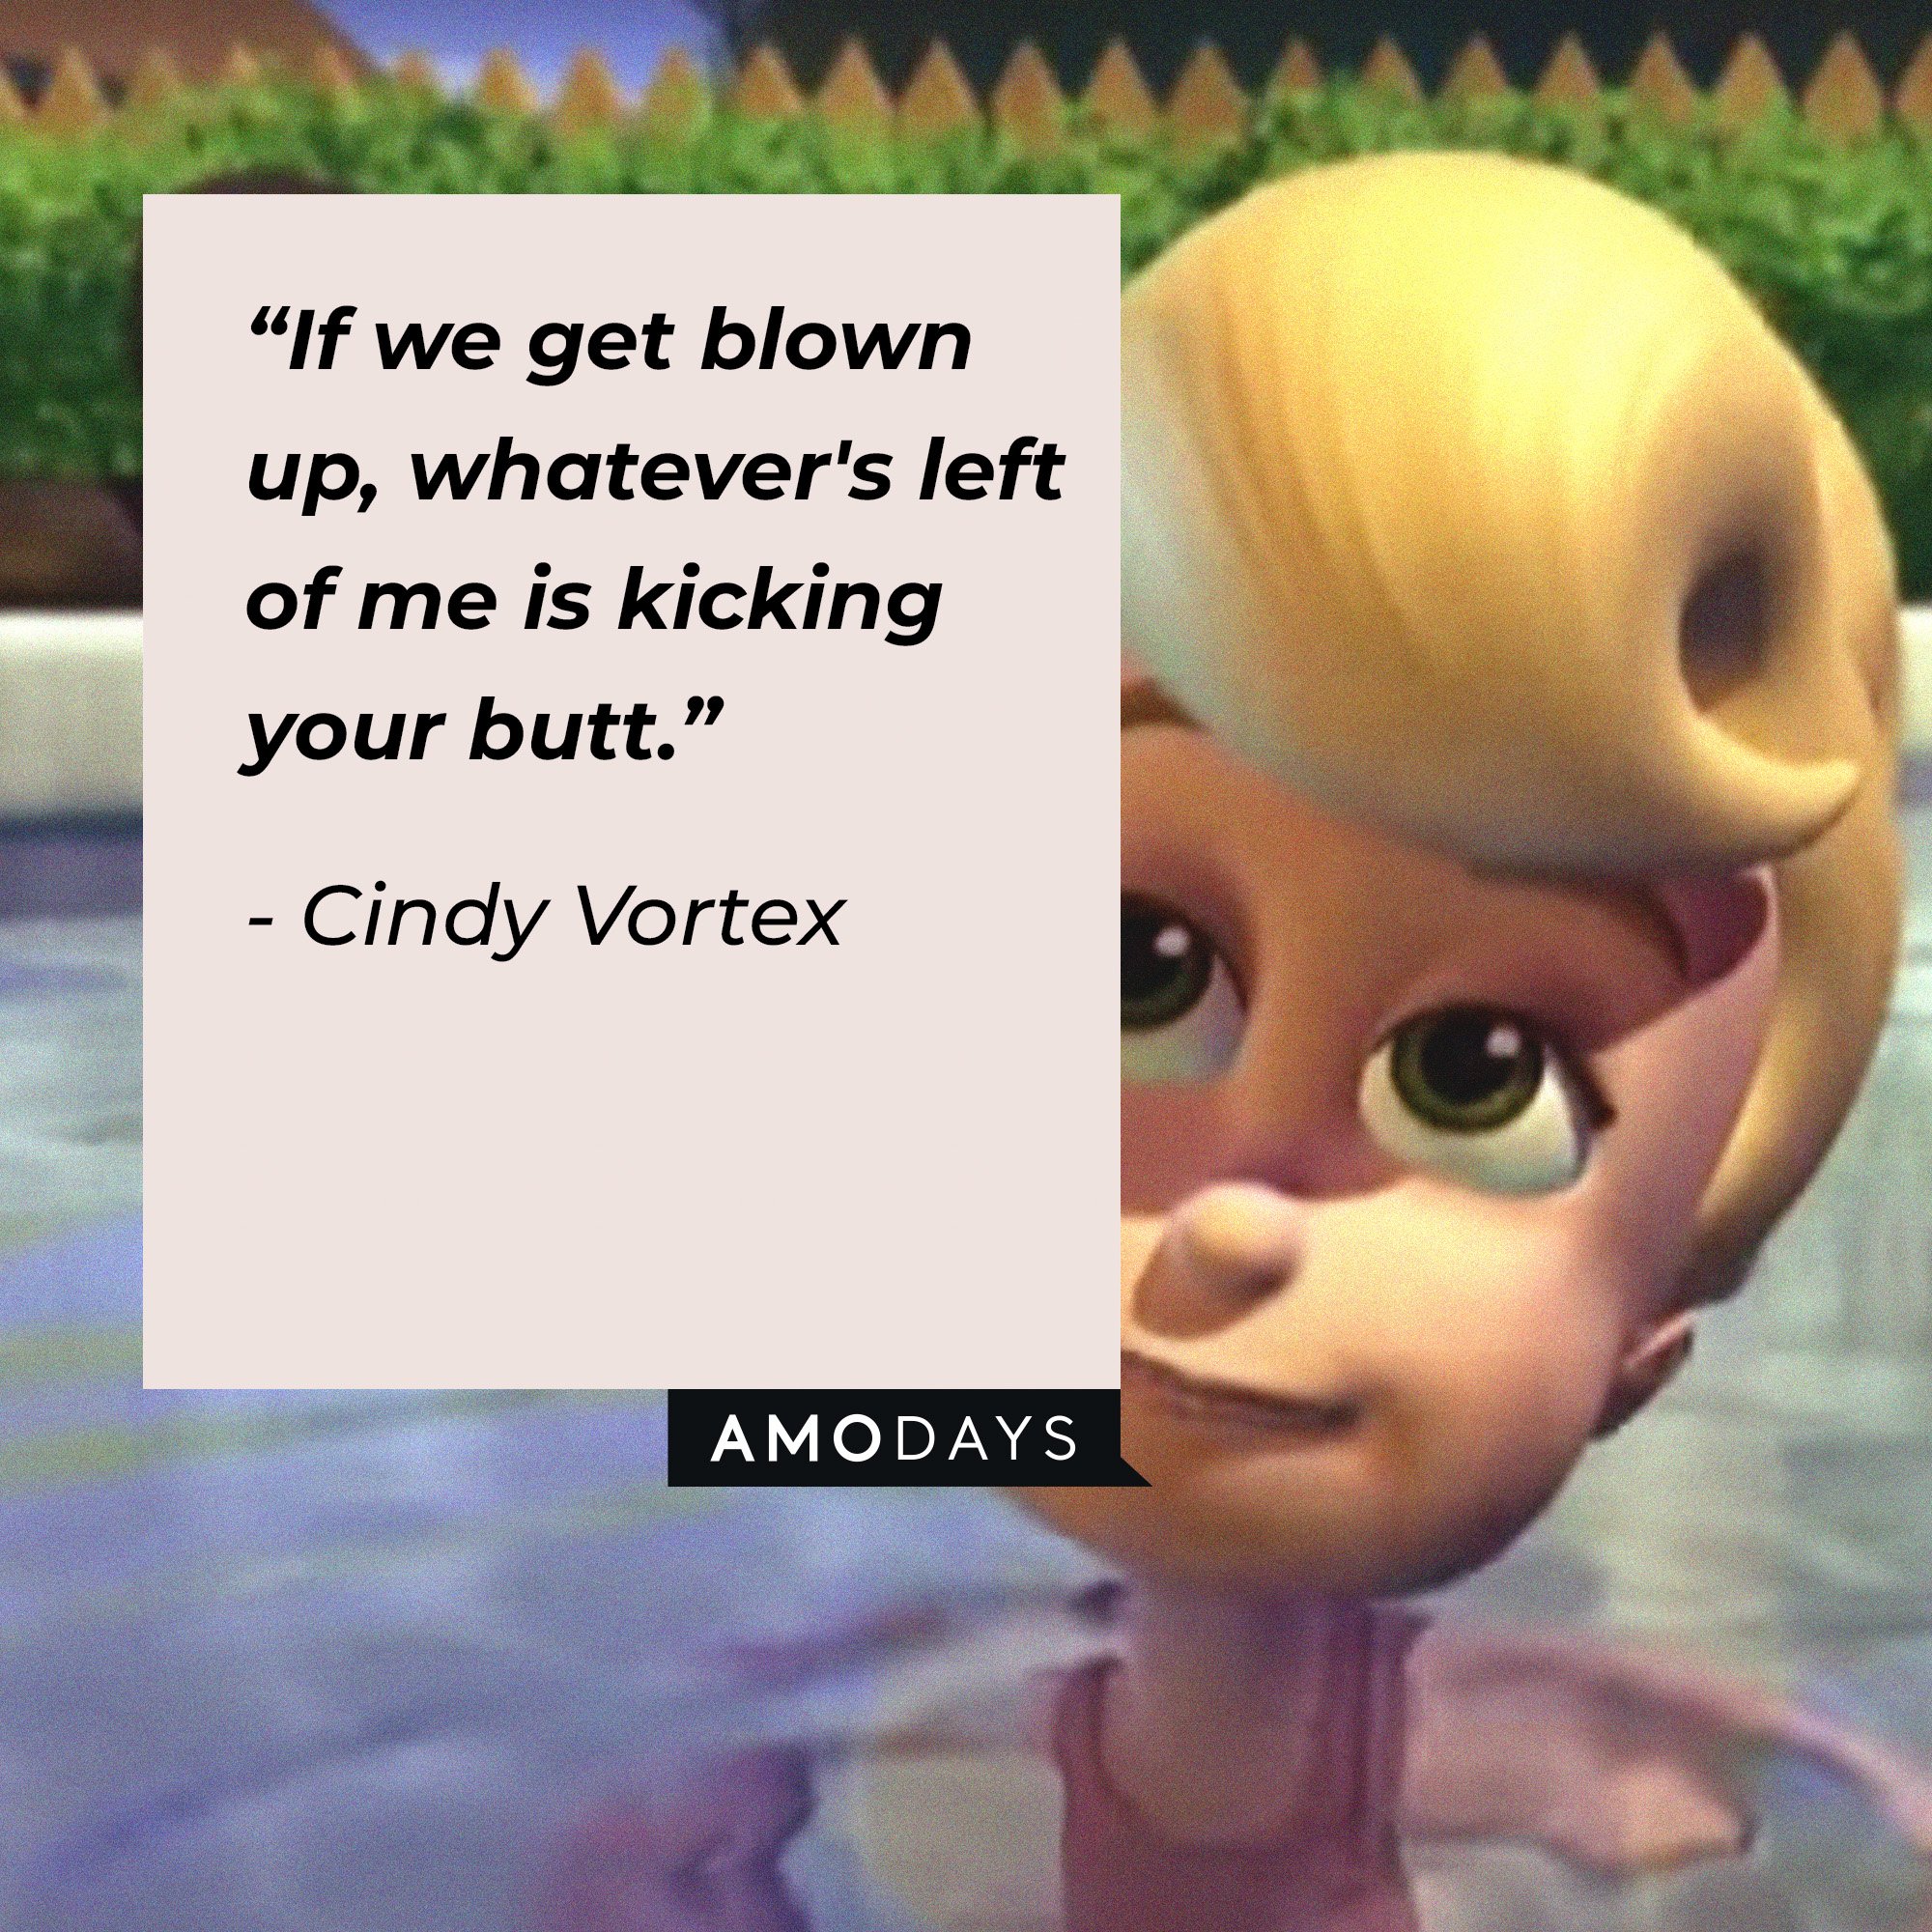 Cindy Vortex’s quote: “If we get blown up, whatever's left of me is kicking your butt.” | Image: AmoDays